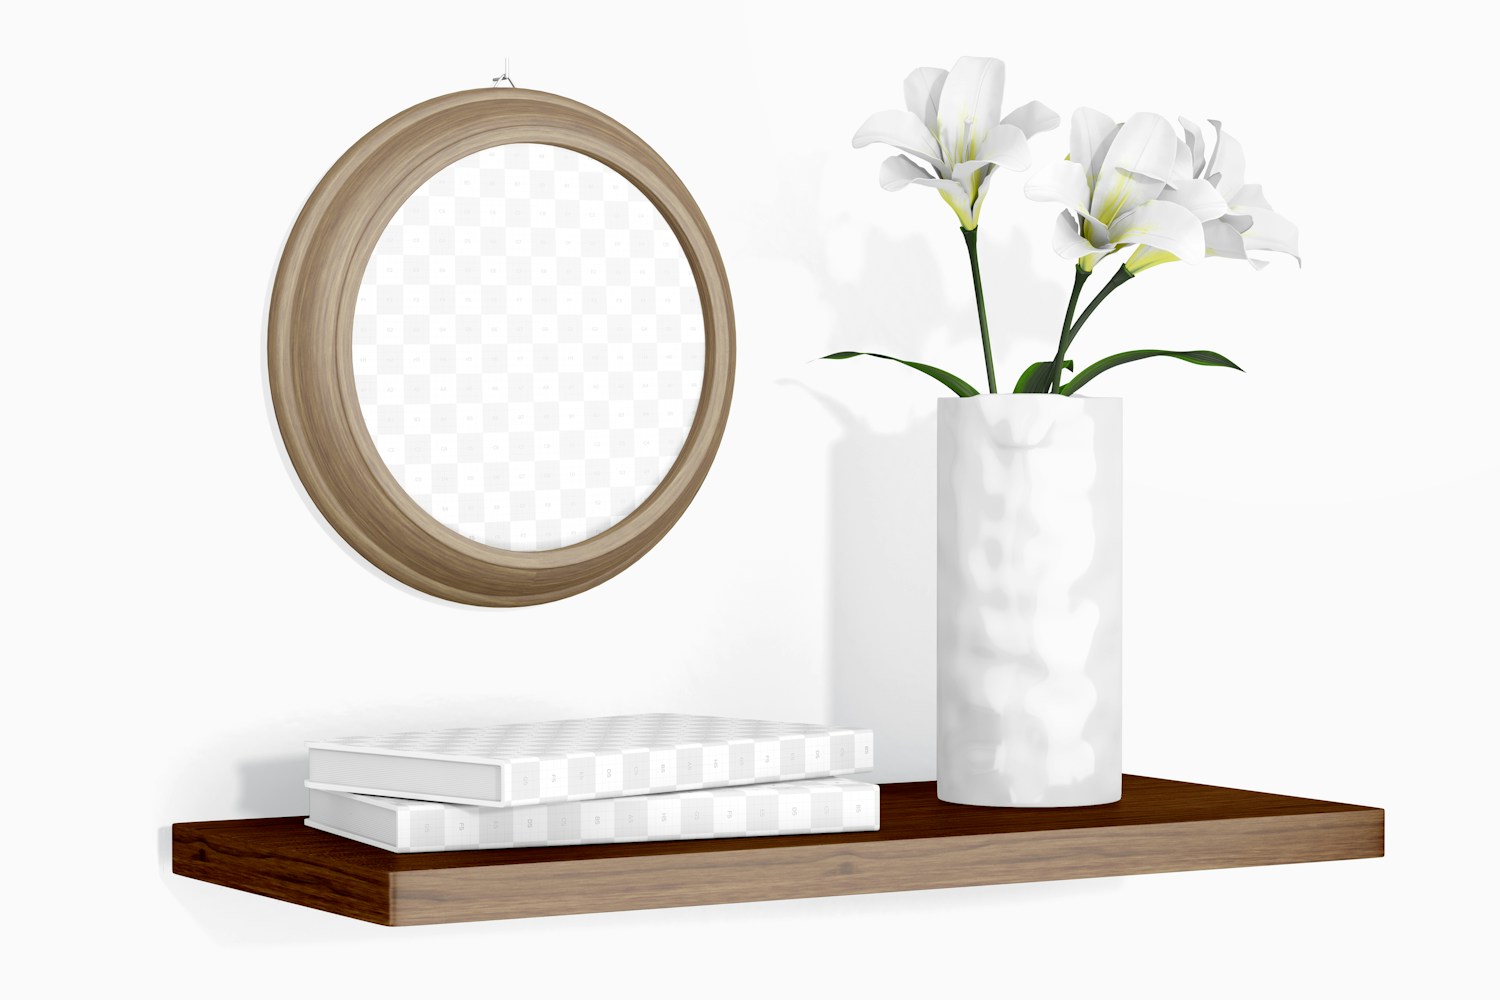 Round Photo Frame with Flower Vessel Mockup